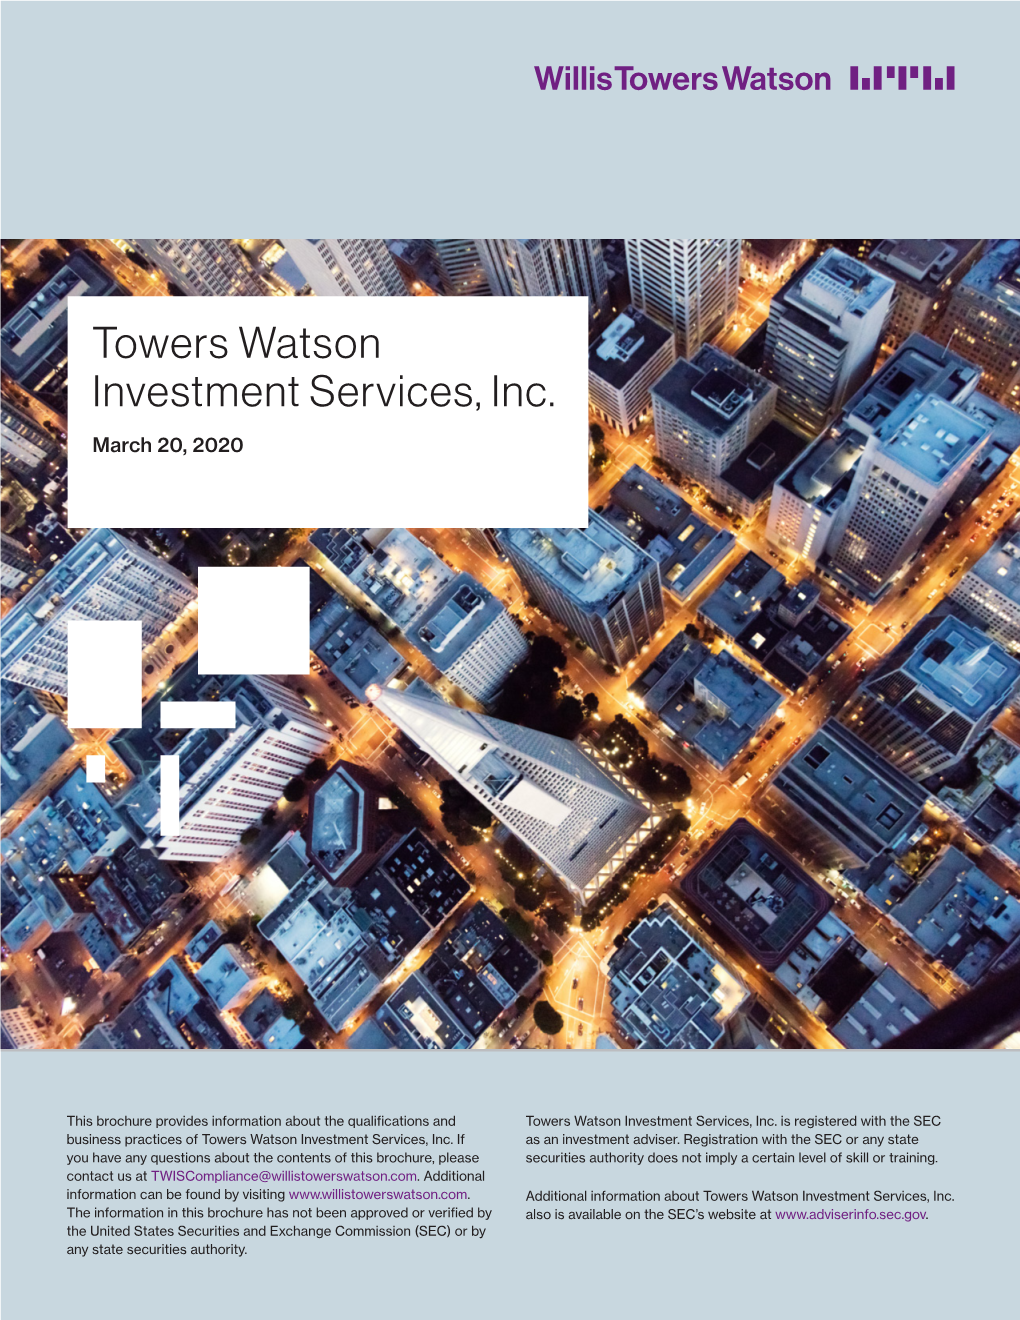 Towers Watson Investment Services, Inc